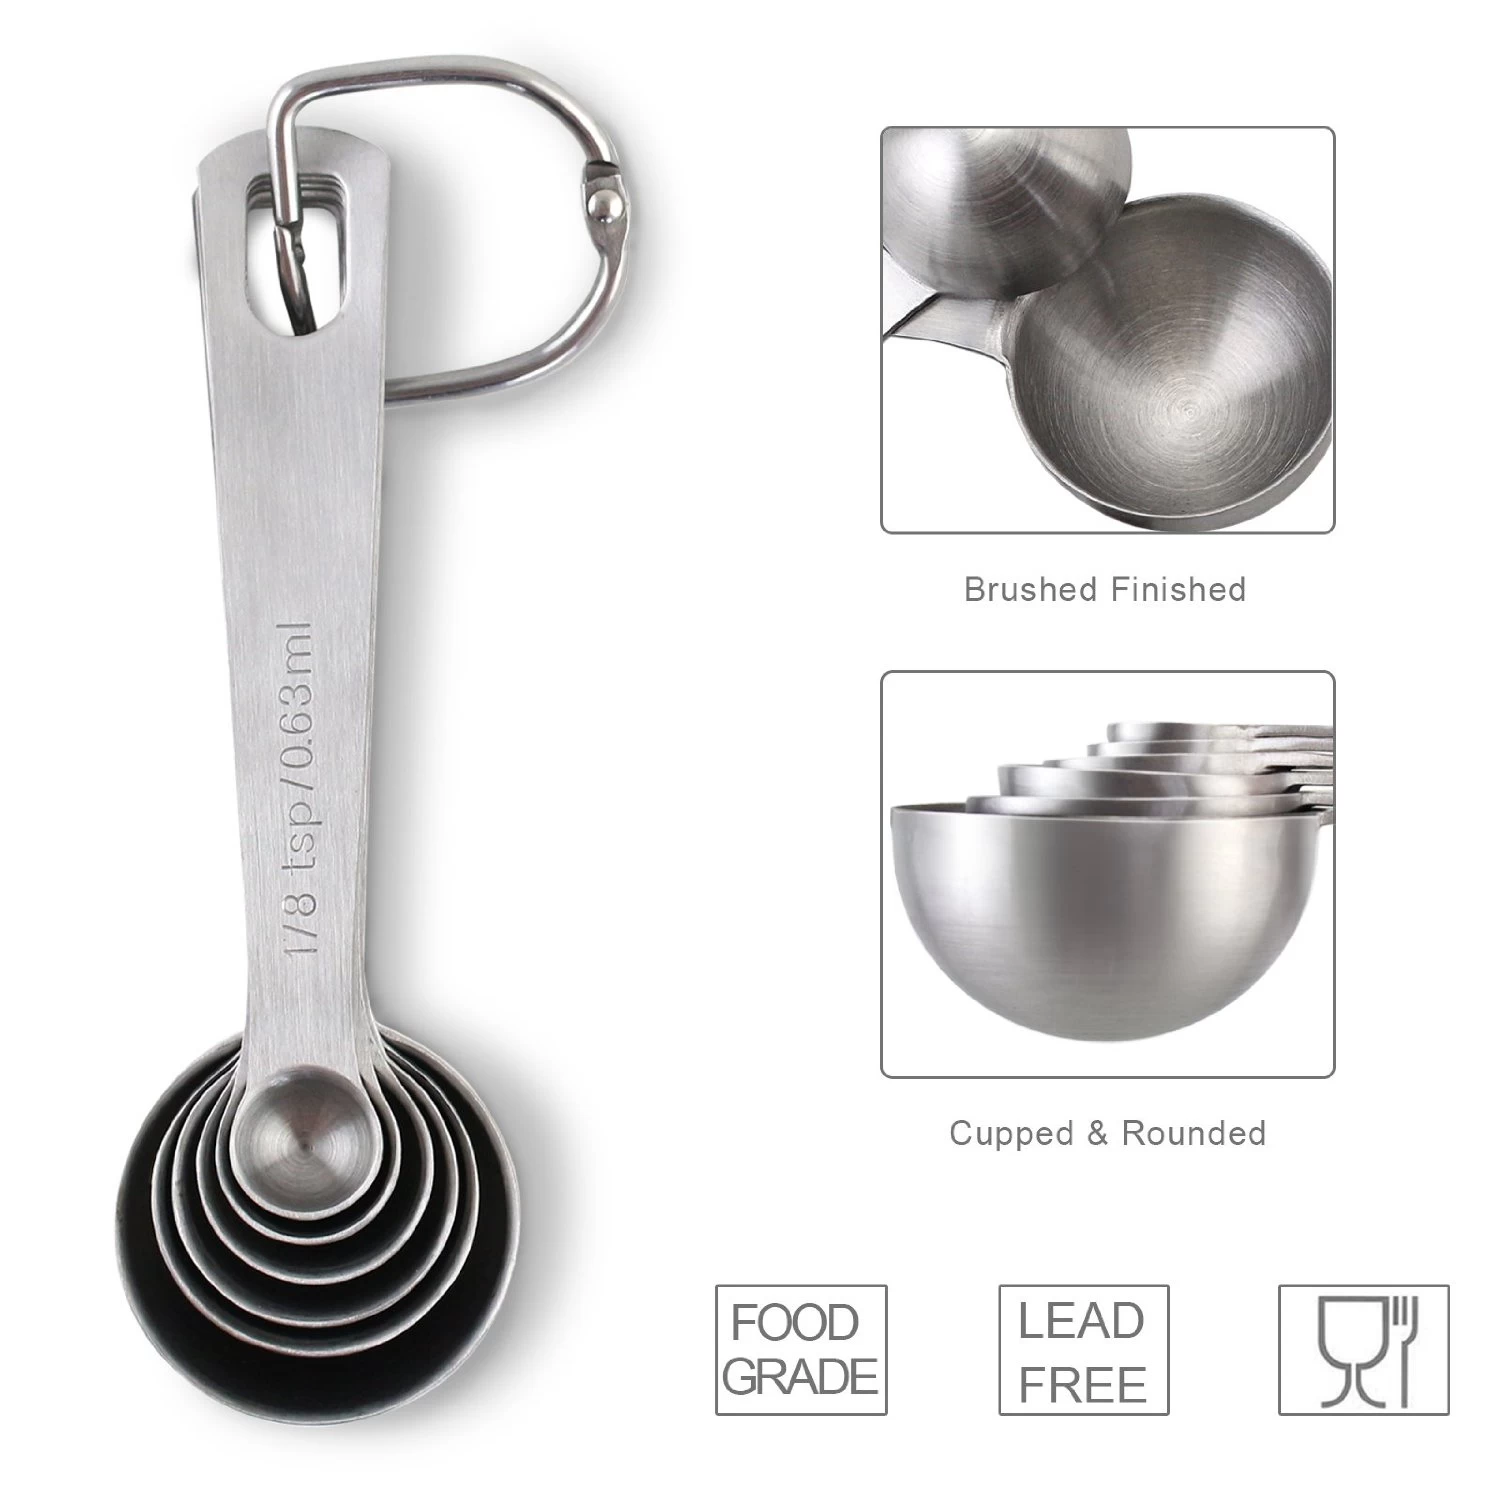 Stainless Steel Measuring Spoon factory,China Measuring Spoon factory